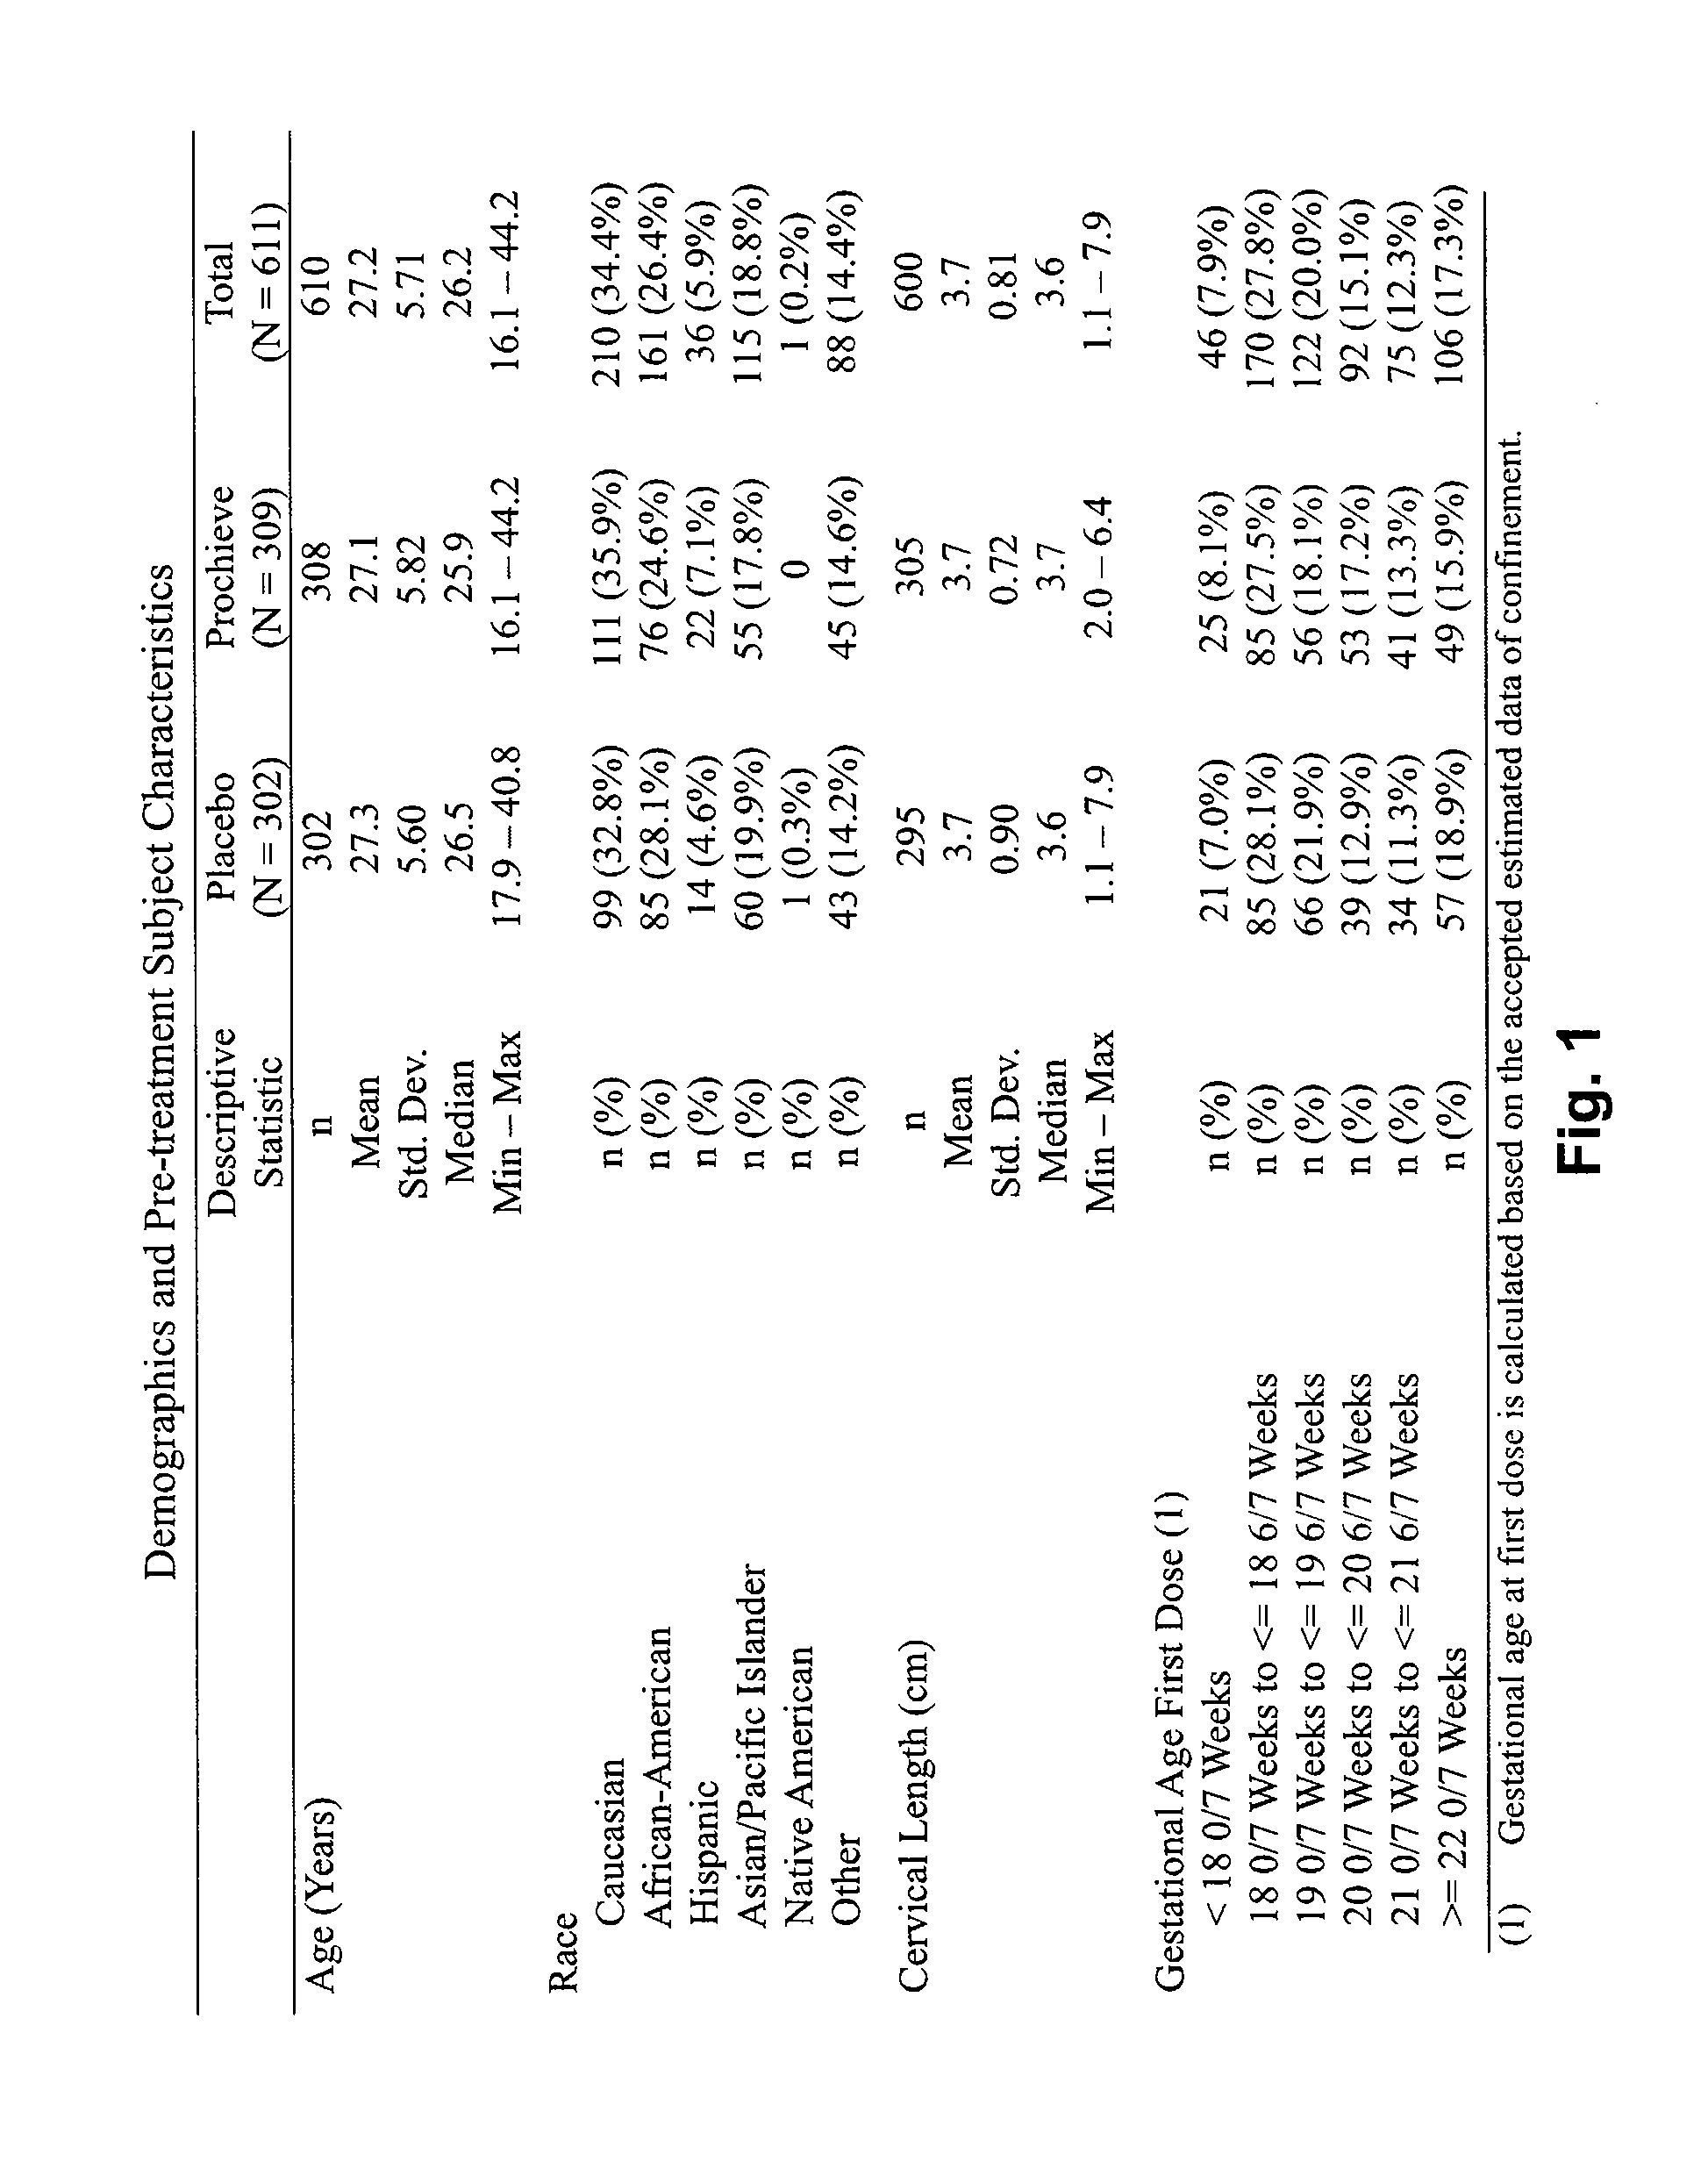 Progesterone for the treatment or prevention of spontaneous preterm birth